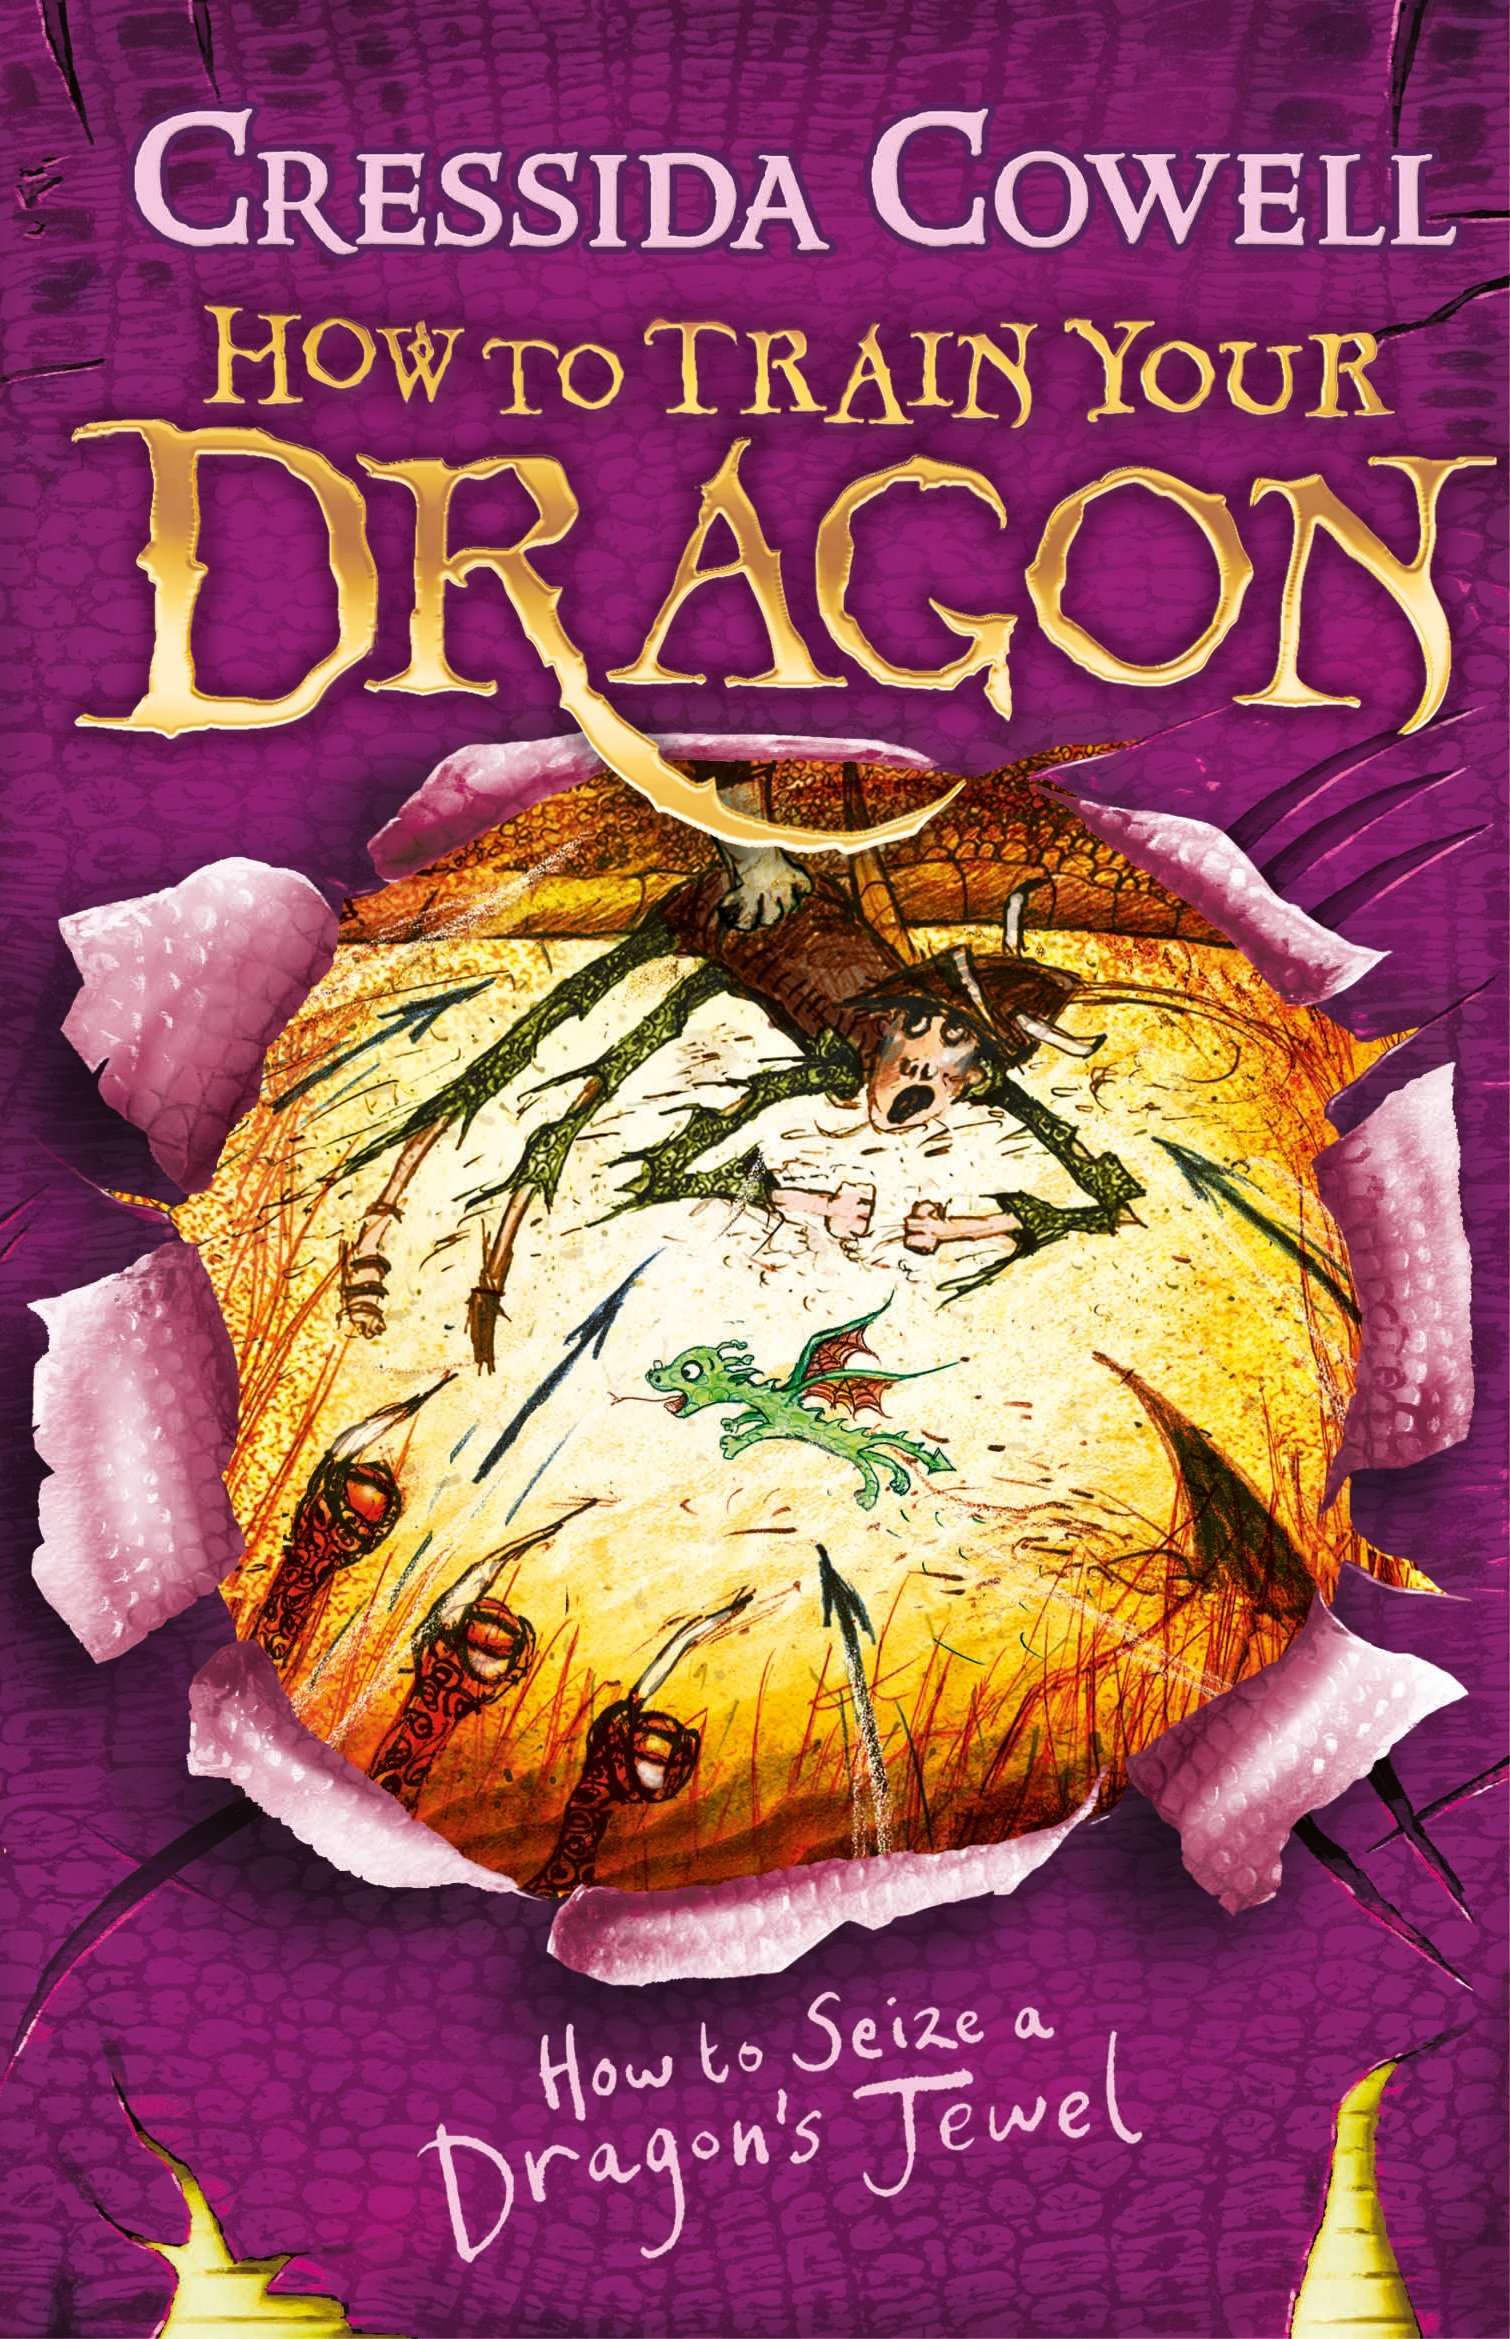 How to Seize a Dragon's Jewel - listen book free online